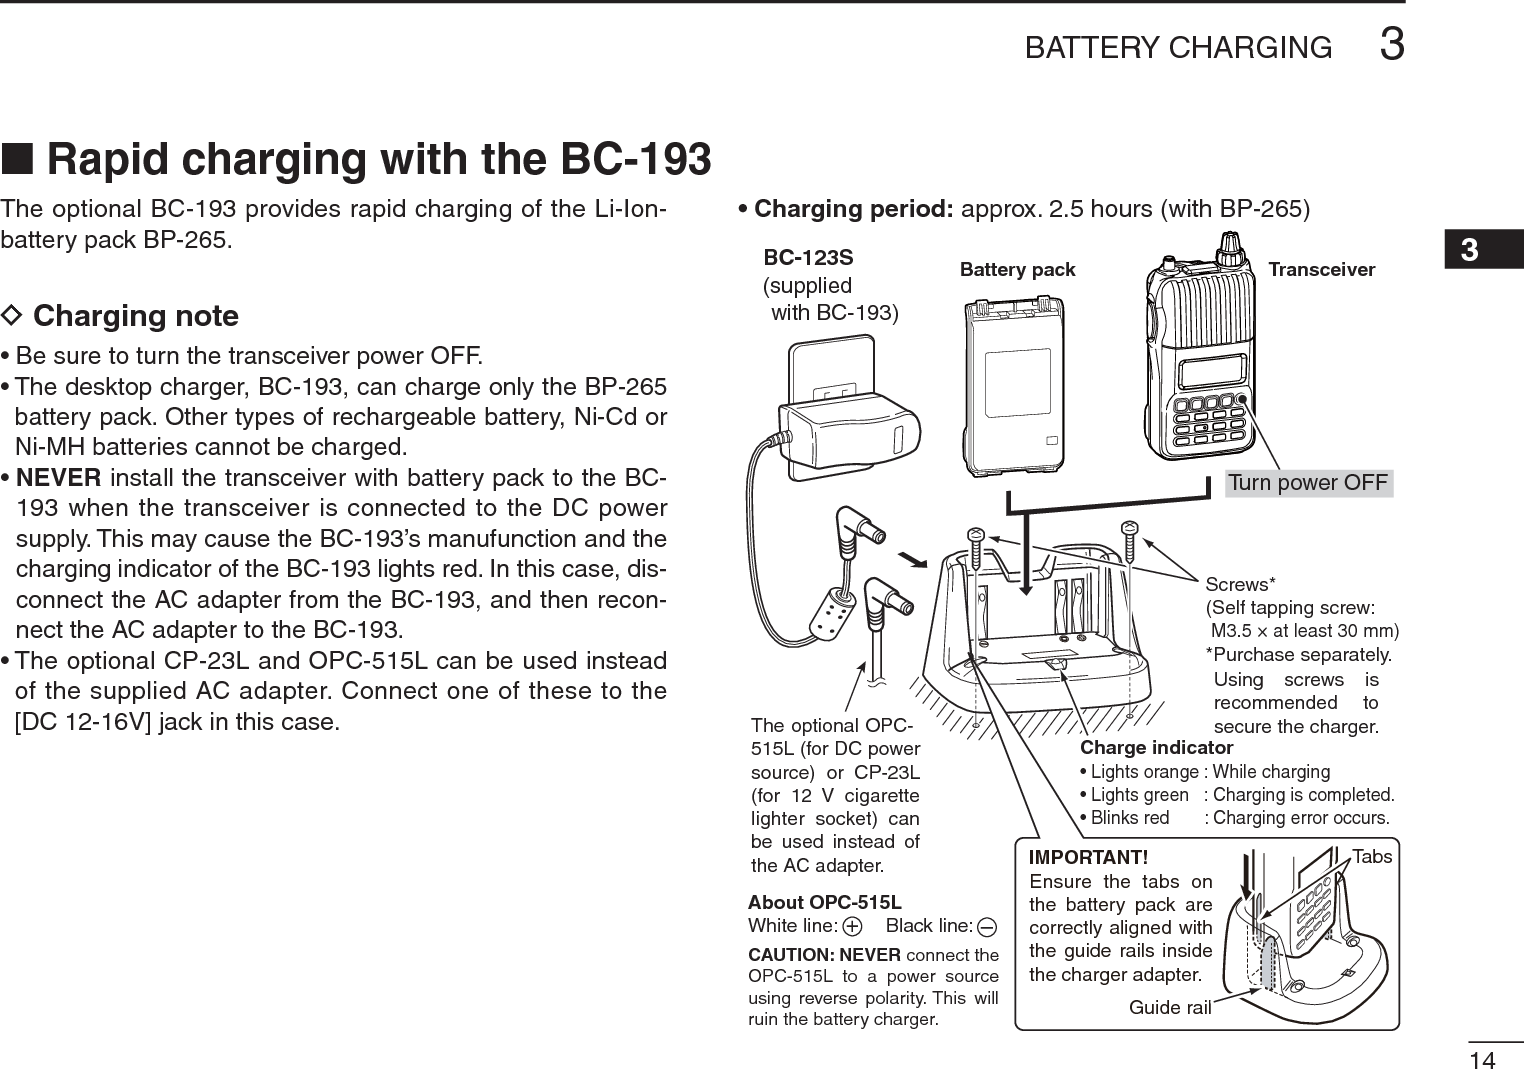 143BATTERY CHARGING3The optional BC-193 provides rapid charging of the Li-Ion-battery pack BP-265.DCharging note• Be sure to turn the transceiver power OFF.• The desktop charger, BC-193, can charge only the BP-265 battery pack. Other types of rechargeable battery, Ni-Cd or Ni-MH batteries cannot be charged.•NEVER install the transceiver with battery pack to the BC-193 when the transceiver is connected to the DC power supply. This may cause the BC-193’s manufunction and the charging indicator of the BC-193 lights red. In this case, dis-connect the AC adapter from the BC-193, and then recon-nect the AC adapter to the BC-193.• The optional CP-23L and OPC-515L can be used instead of the supplied AC adapter. Connect one of these to the [DC 12-16V] jack in this case.• Charging period: approx. 2.5 hours (with BP-265)TransceiverTurn power OFFBattery packBC-123S(suppliedwith BC-193)The optional OPC-515L (for DC powersource) or CP-23L(for 12 V cigarettelighter socket) canbe used instead ofthe AC adapter.Charge indicator• Lights orange : While charging• Lights green : Charging is completed.• Blinks red : Charging error occurs.Screws*(Self tapping screw:M3.5 × at least 30 mm)*Purchase separately.Using screws isrecommended tosecure the charger.About OPC-515LWhite line:         Black line:CAUTION: NEVER connect theOPC-515L to a power sourceusing reverse polarity. This willruin the battery charger.+–IMPORTANT!Ensure the tabs onthe battery pack arecorrectly aligned withthe guide rails insidethe charger adapter.Guide railTabsN Rapid charging with the BC-193